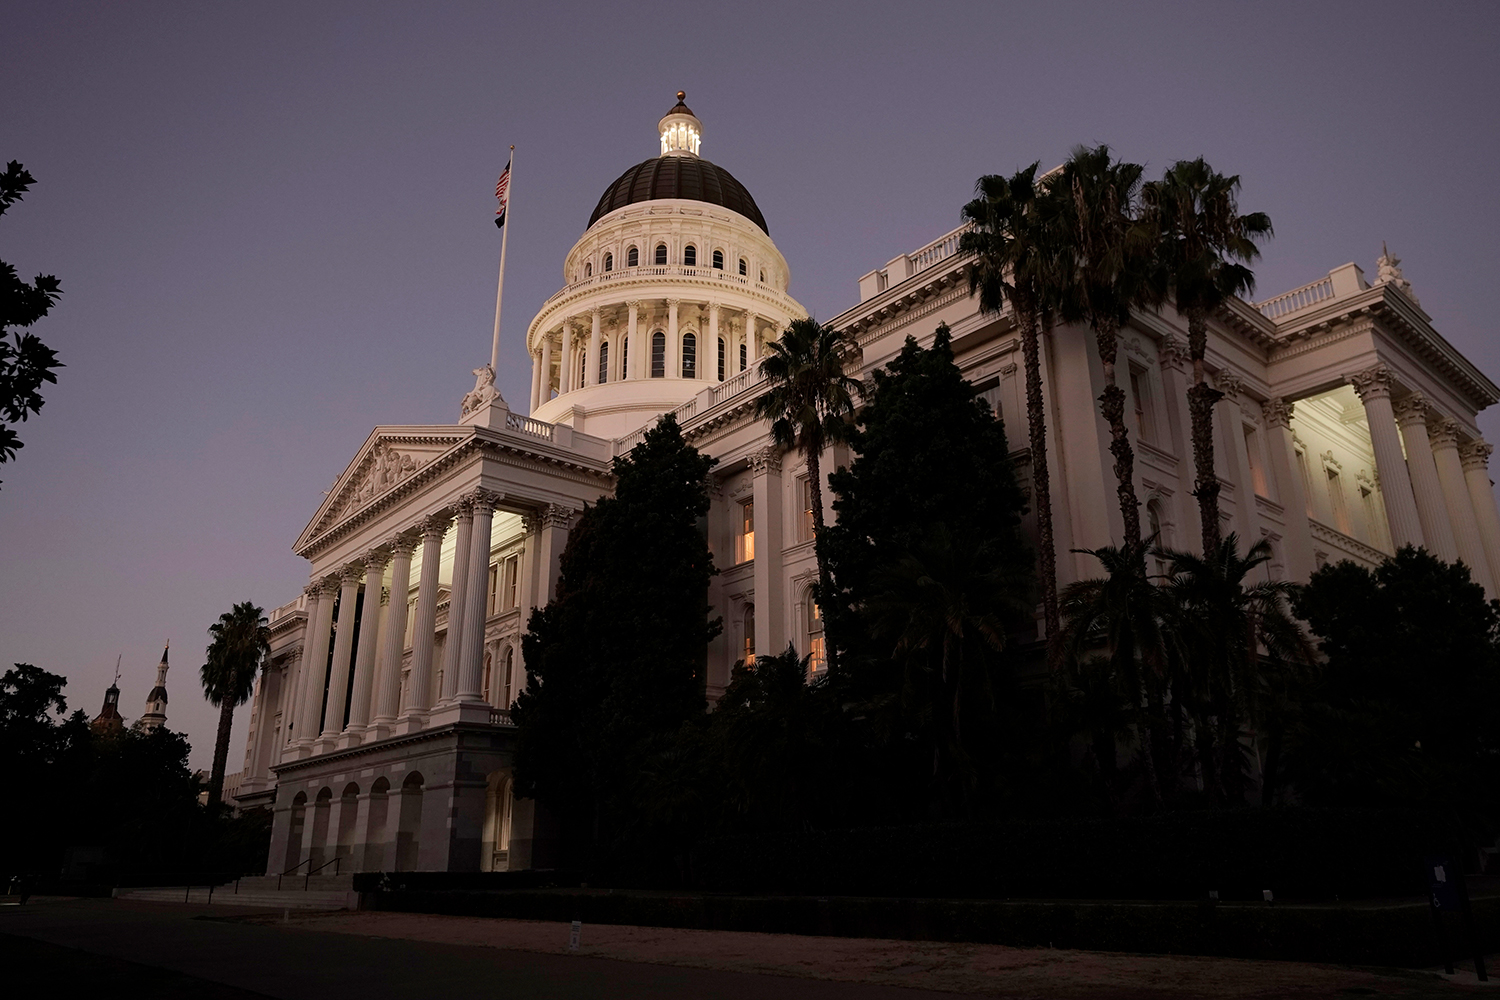 The lights of the state Capitol glow into the night in Sacramento, Calif., Wednesday, Aug. 31, 2022. (AP Photo/Rich Pedroncelli)